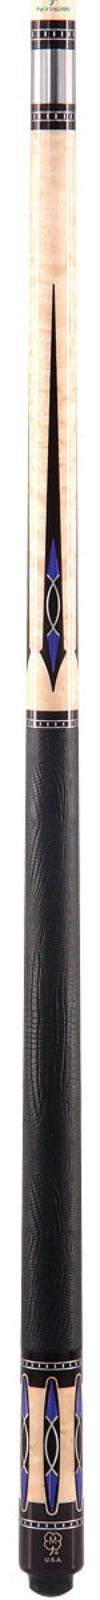 McDermott McDermott G703 Pool Cue - Comes with I-2 Shaft Pool Cue